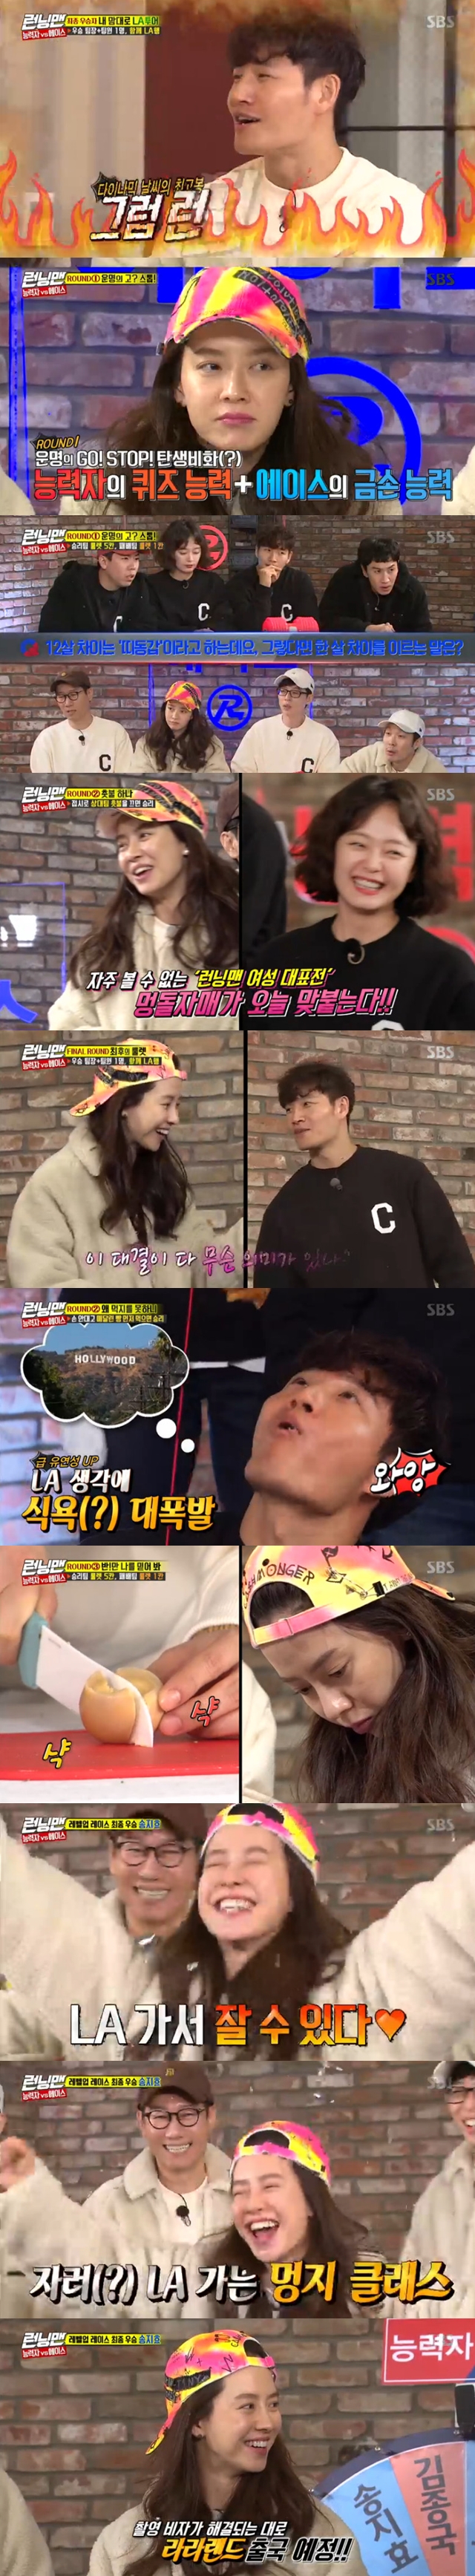 Song Ji-hyo was also a Running Man true Ace.On SBS Running Man broadcast on February 10, Song Ji-hyo Kim Jong-kook, the final winner of the Level Up Project, was shown to meet again as a rival and play a big match.Song Ji-hyo Kim Jong-kook, the final winner of the New Year Project Level-up Race, met with the production team separately.It was to decide whether to take the SBS corporation card that was injured or to join together.Kim Jong-kook and Song Ji-hyo, both at the crossroads of Choices, were Choices for single as promised.This was the Running Man ninth year friendship.Eventually, the two decided to drive the corporate card to one person through a confrontation, and Kim Jong-kook said, I think I should go to LA, my second hometown.Even if I shoot 24 hours, it is welcome to do it in LA. I want to go 24 hours. So Song Ji-hyo also hoped to go to LA, saying, I want to feel LA like that once.So the so-called Lara Land Race for the final winner of Kim Jong-kook vs. Ace Song Ji-hyo was started.The crew decided to fully support the LA travel expenses to the winning member through the confrontation, and the other members decided to play Game all day with Choices, who is more attracted to the two LA travel plans.The team leader, who won the game, was able to travel to LA with one of his team members, but the members were burdened by their forced friendship trip to LA alone.First, Kim Jong-kook appealed that he would eat Korean food if he traveled with him. He also announced plans to visit the Los Angeles Dodgers Stadium and Santa Monica.To Jeon So-min, Hunnams younger brothers said there were a lot in LA, which left him harsh.However, it was predicted that the travel concept with Kim Jong-kook will be a Spartan course.I cant rest on the tour, Yoo Jae-Suk said, while Lee Kwang-soo revealed the side effects, saying, Im so happy, Im out of 7kg, Im having a diet effect.The LA travel concept of Song Ji-hyo, the first to travel to Los Angeles, was freedom and healing; Song Ji-hyo said, I like to be spread out without likeing to travel the type of tourism.I dont want to be busy, and if I do as Im told, Ill be stressed by the next schedule. Ill take free time and travel free until 5 or 6 p.m..Kim Jong-kook does not drink, but we can accompanise and play the truth game, he said, cheering the members.In addition, Song Ji-hyo seduced members with his spleen weapon, promising to release a full story of the Christmas incident wrapped in veil.Song Ji-hyo said on the show on December 30 last year, I decided to spend Christmas together at home with my ex-boyfriend, and I fell asleep playing like that.I woke up the night I was sleeping and took him to the next room, and there was a line of balloons full in the room, and I knew I couldnt get up, so I had planned it all before.I was so impressed that I had a glass of wine and it was morning. I did not disclose what I played until the morning came to light, so I was called Christmas Skip Case .Song Ji-hyos popularity of Mungtour, which can be heard in two months, has been running high.In the end, Yoo Jae-Suk Ji Suk-jin Haha played Song Ji-hyo, Lee Kwang-soo Jeon So-min Yang Se-chan played Choices and Game as team leader Kim Jong-kook.The first game Go of Destiny? Stop! Using the ability of Kim Jong-kooks quiz ability, Ace Song Ji-hyos gold hand ability.With the start of the game, Song Ji-hyo showed off the dignity of Running Man ninth year Ace, leading the team to a pleasant victory.The second round was a betting area work game, and the Song Ji-hyo team was also dominant.In the game where the winner wins if he blows the ball and puts it in the final cup first, the Song Ji-hyo team wins when the opponent candle is turned off with a plate, and Kim Jong-kook team manages to win the game when he eats the bread hanging with his hand first.The Kim Jong-kook team, which only won once, was put in a feverish position.The last showdown to LA was Trust me half the time, a game in which a team with a smaller margin of error won by cutting the material given in exactly half within the time limit.Again, the goddess of victory sided with Song Ji-hyo.In the end, Goldson Song Ji-hyo boasted an extraordinary class and won the final.So Song Ji-hyo cheered, I can go to LA and sleep, and the members acknowledged Song Ji-hyo, saying, The person who is capable is not Ace.bak-beauty